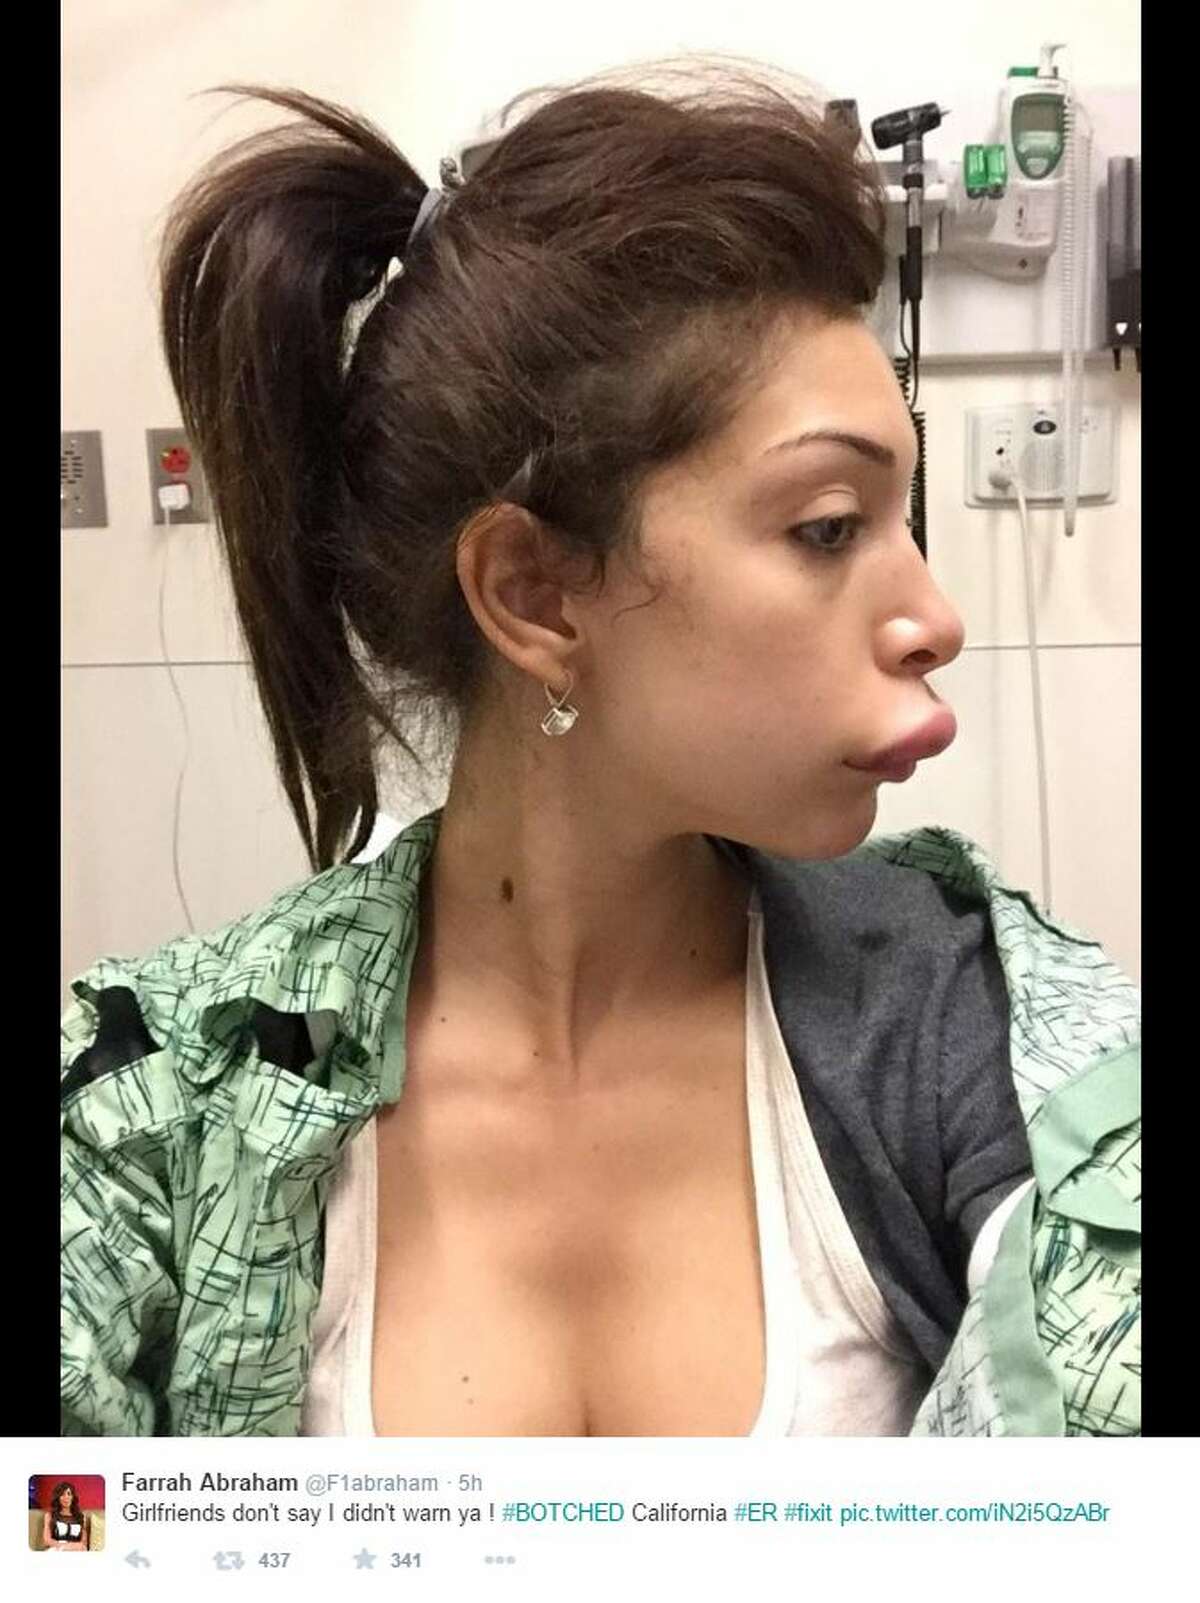 Farrah Abraham, a former star on MTV's "Teen Mom" and "16 and Pregnant" who became a porn actress, looks like she stuck her upper lip in a hornet's nest after some botched plastic surgery. In photos posted to her Twitter profile Tuesday, Abraham's lip looks extremely swollen after an injection gone wrong.